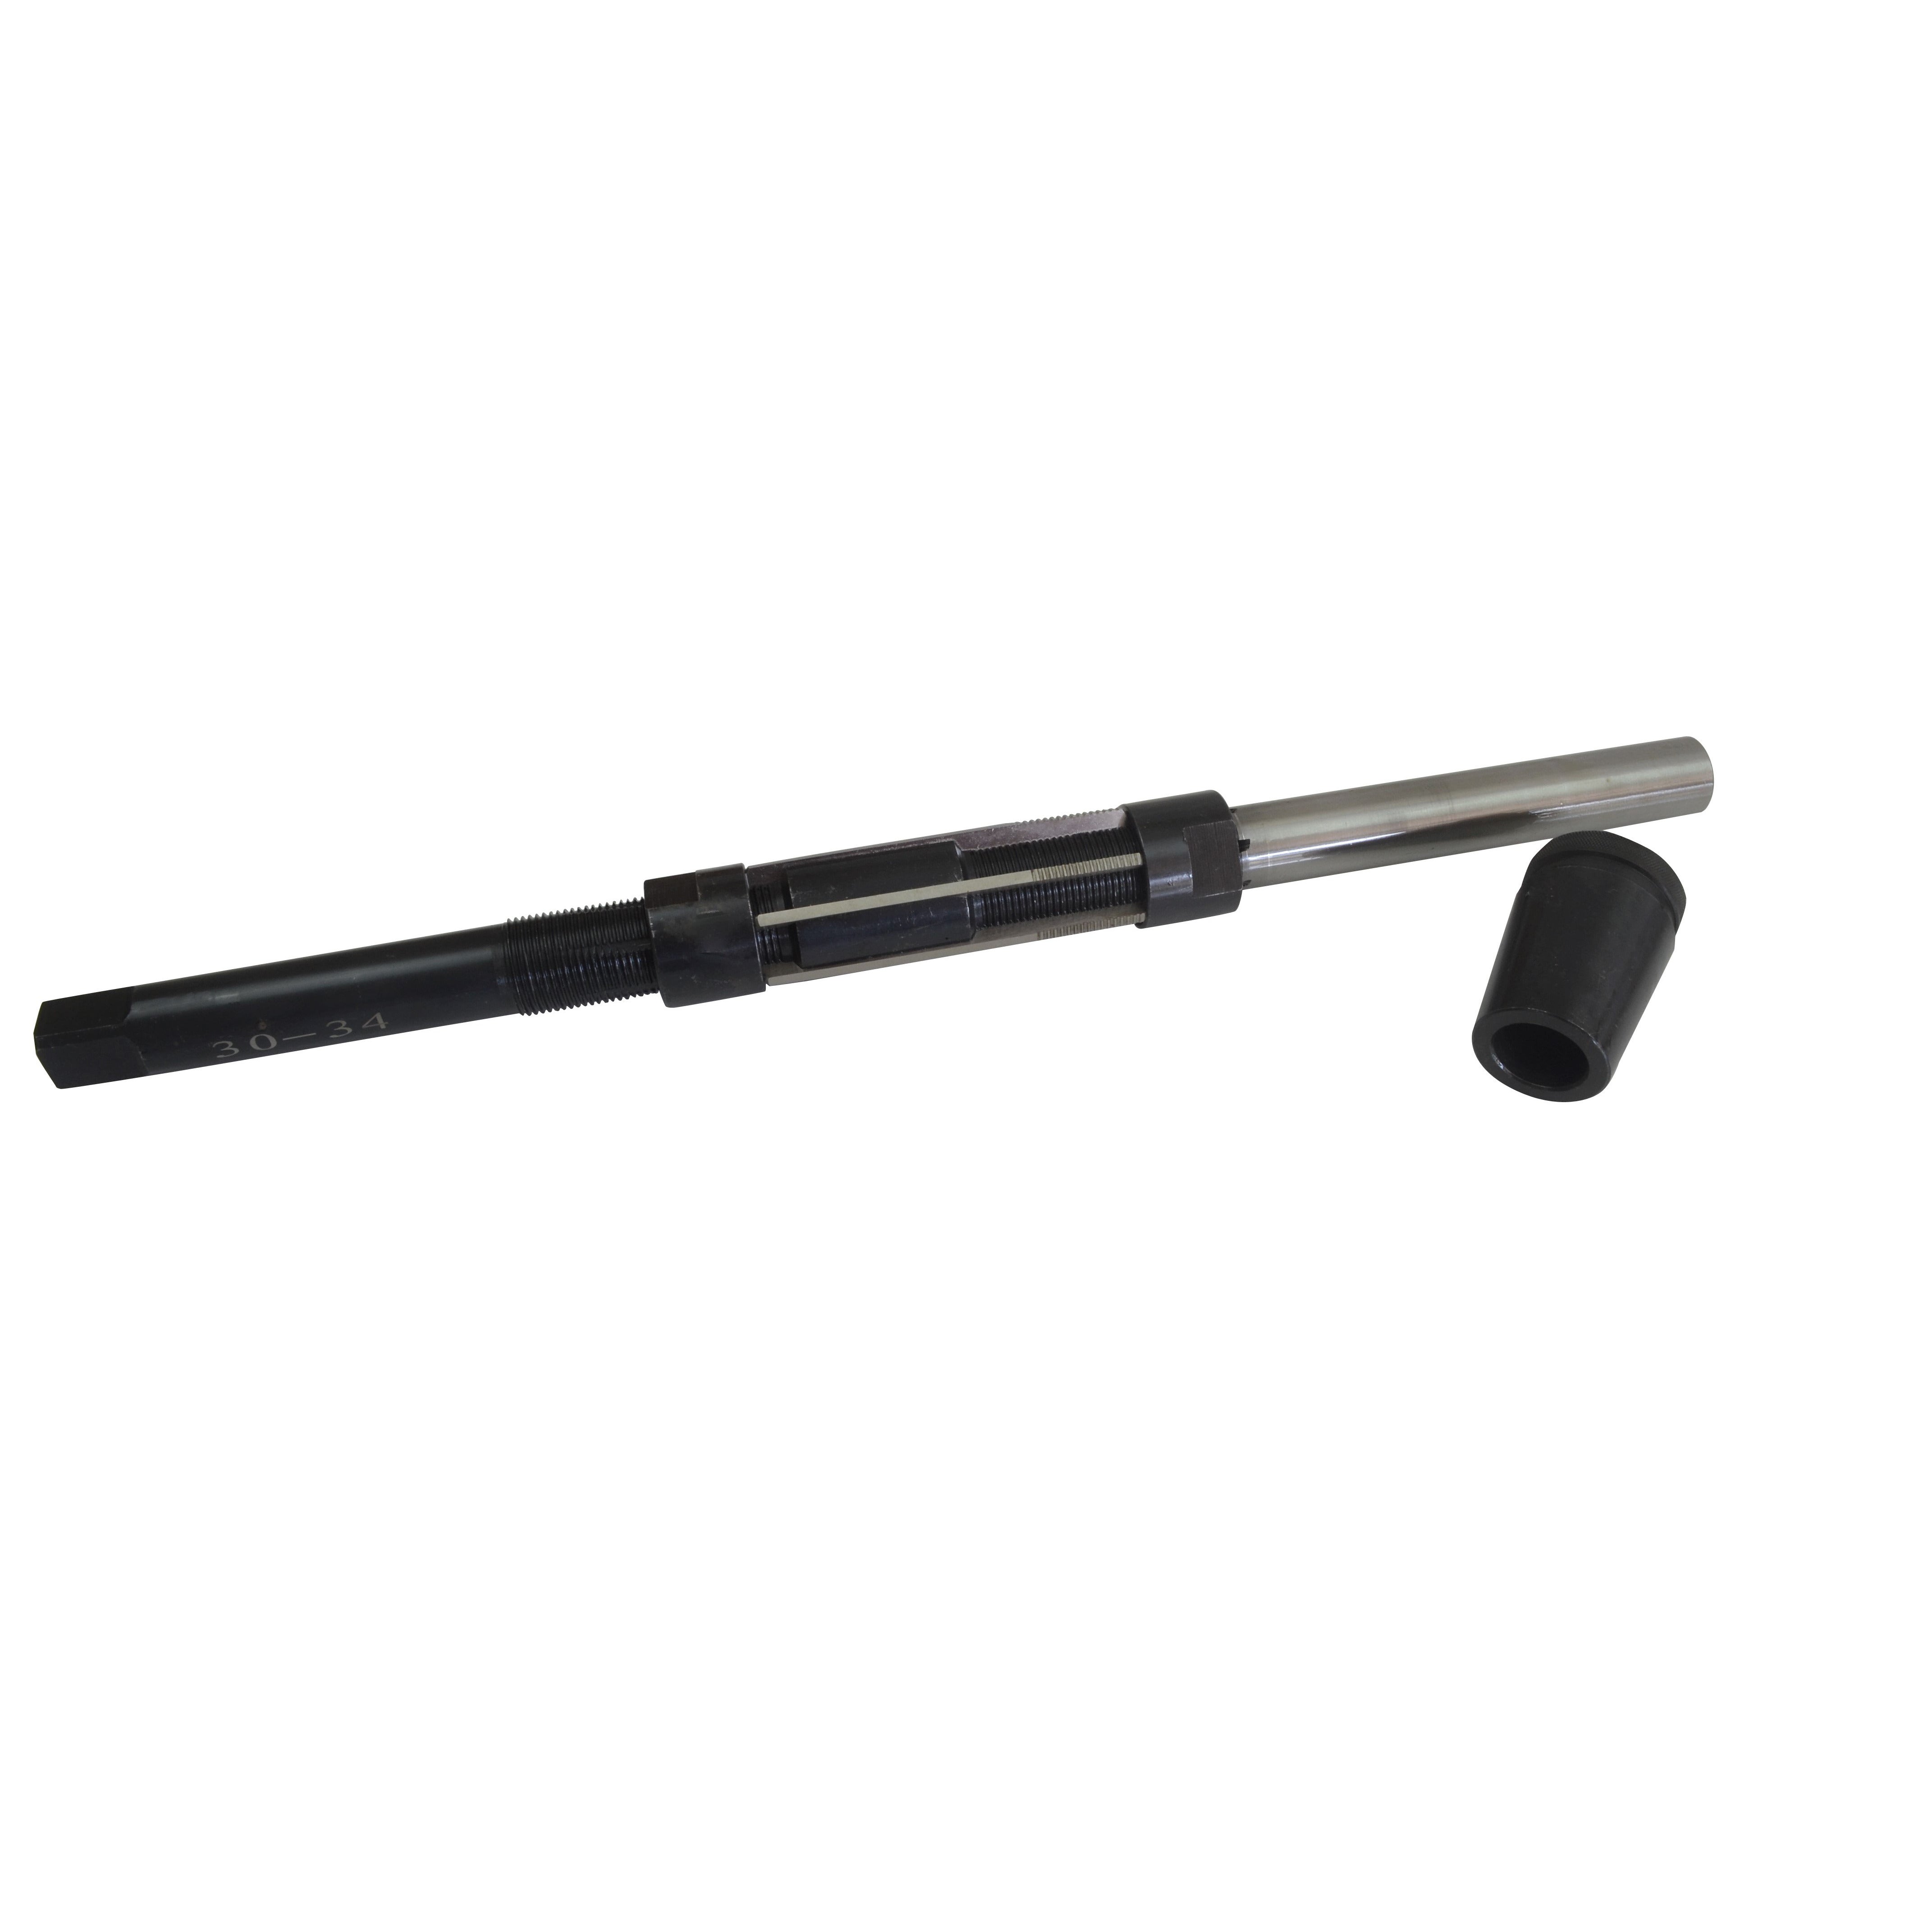 30 - 34mm Adjustable Hand Reamer with Guide